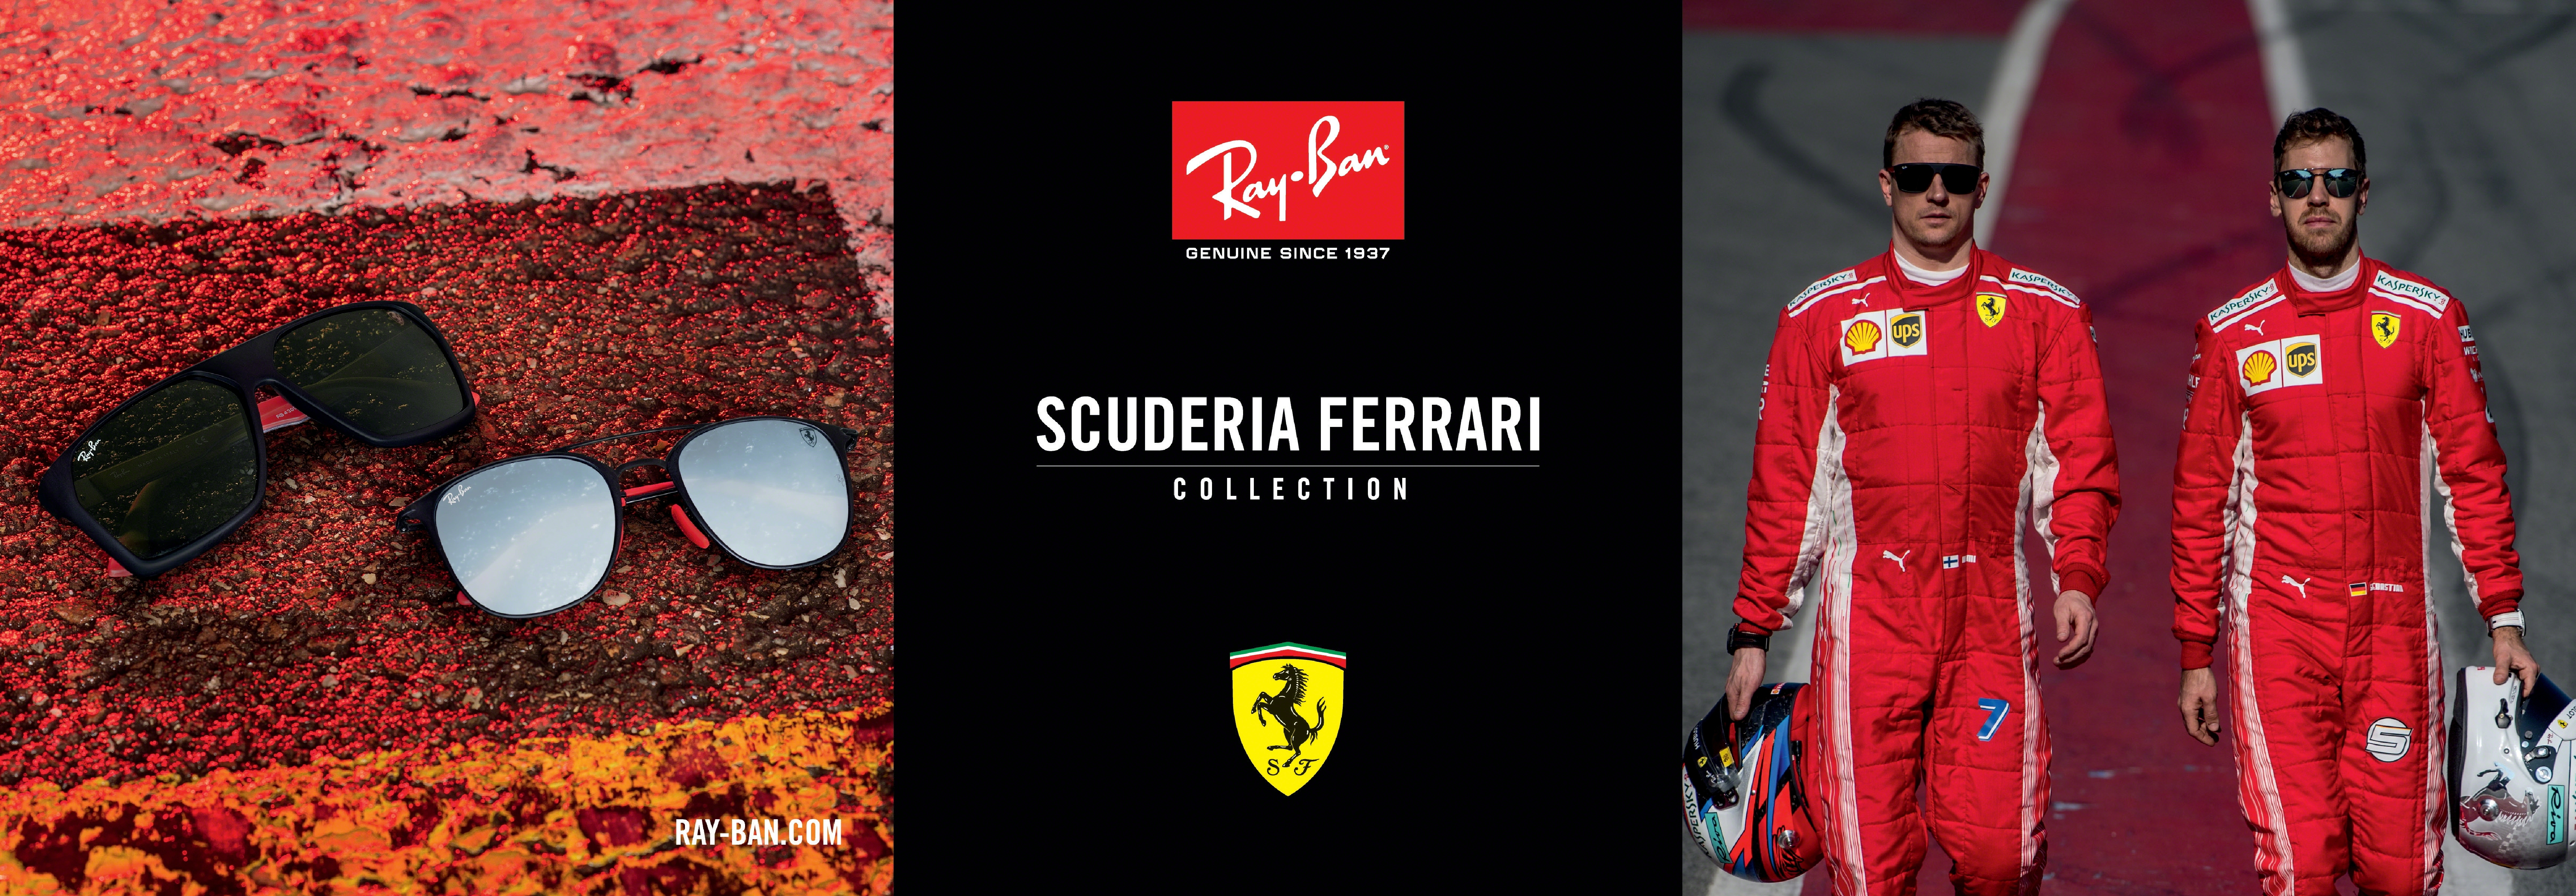 Ray-Ban back on track for follow-up F1 Tour with Scuderia Ferrari  collection : The Moodie Davitt Report -The Moodie Davitt Report